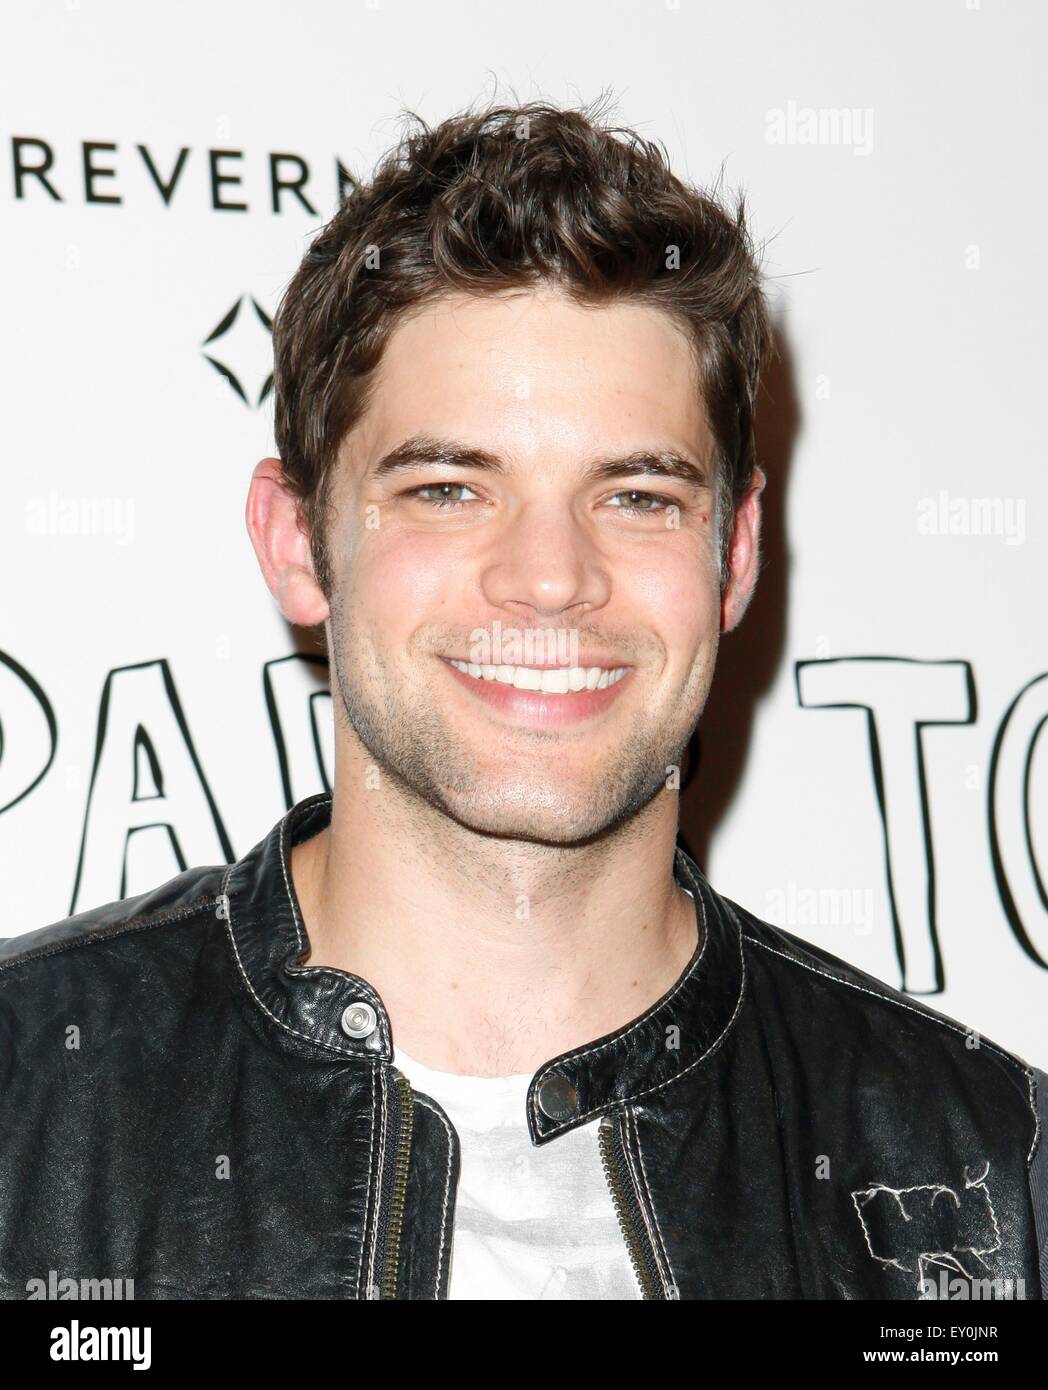 Jeremy Jordan High Resolution Stock Photography and Images - Alamy